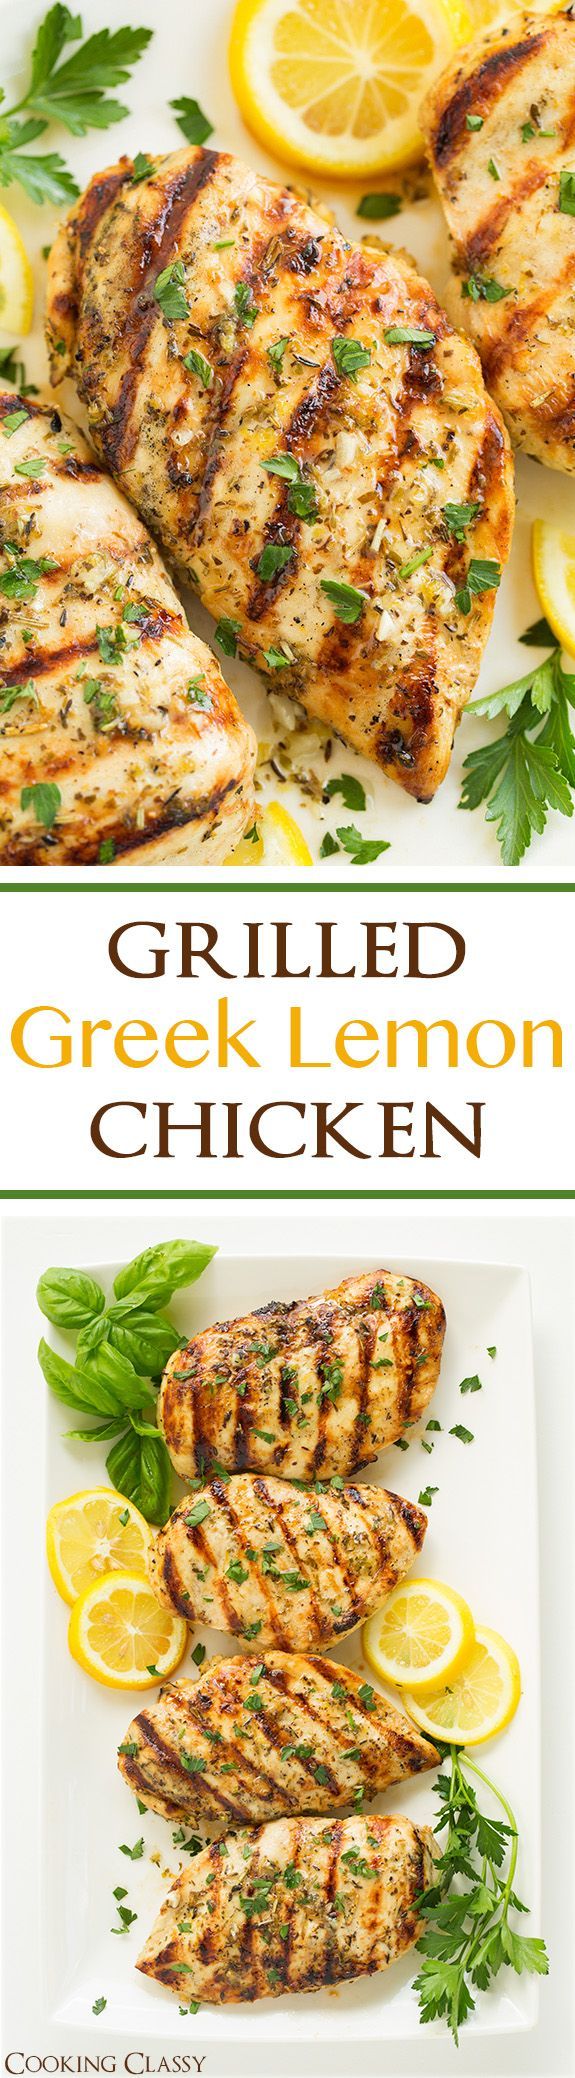 Grilled Greek Lemon Chicken – this chicken is so easy to prepare and it’s deliciously flavorful! A go to dinner recipe! Marinated